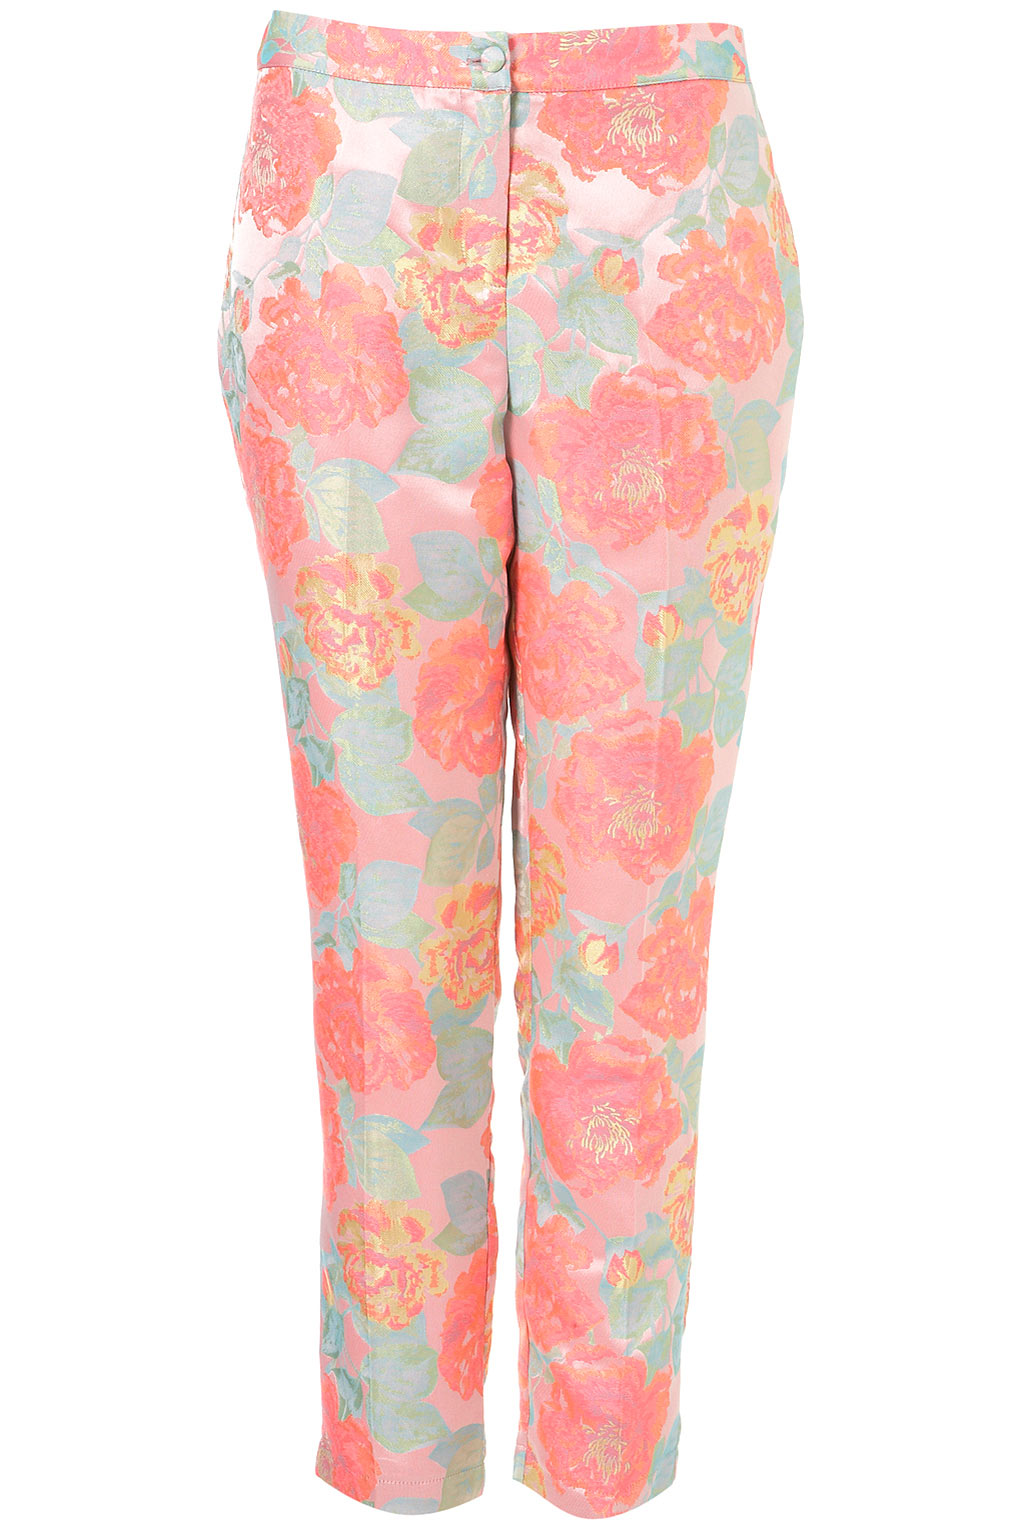 TOPSHOP Floral Jacquard Trousers in Pink - Lyst